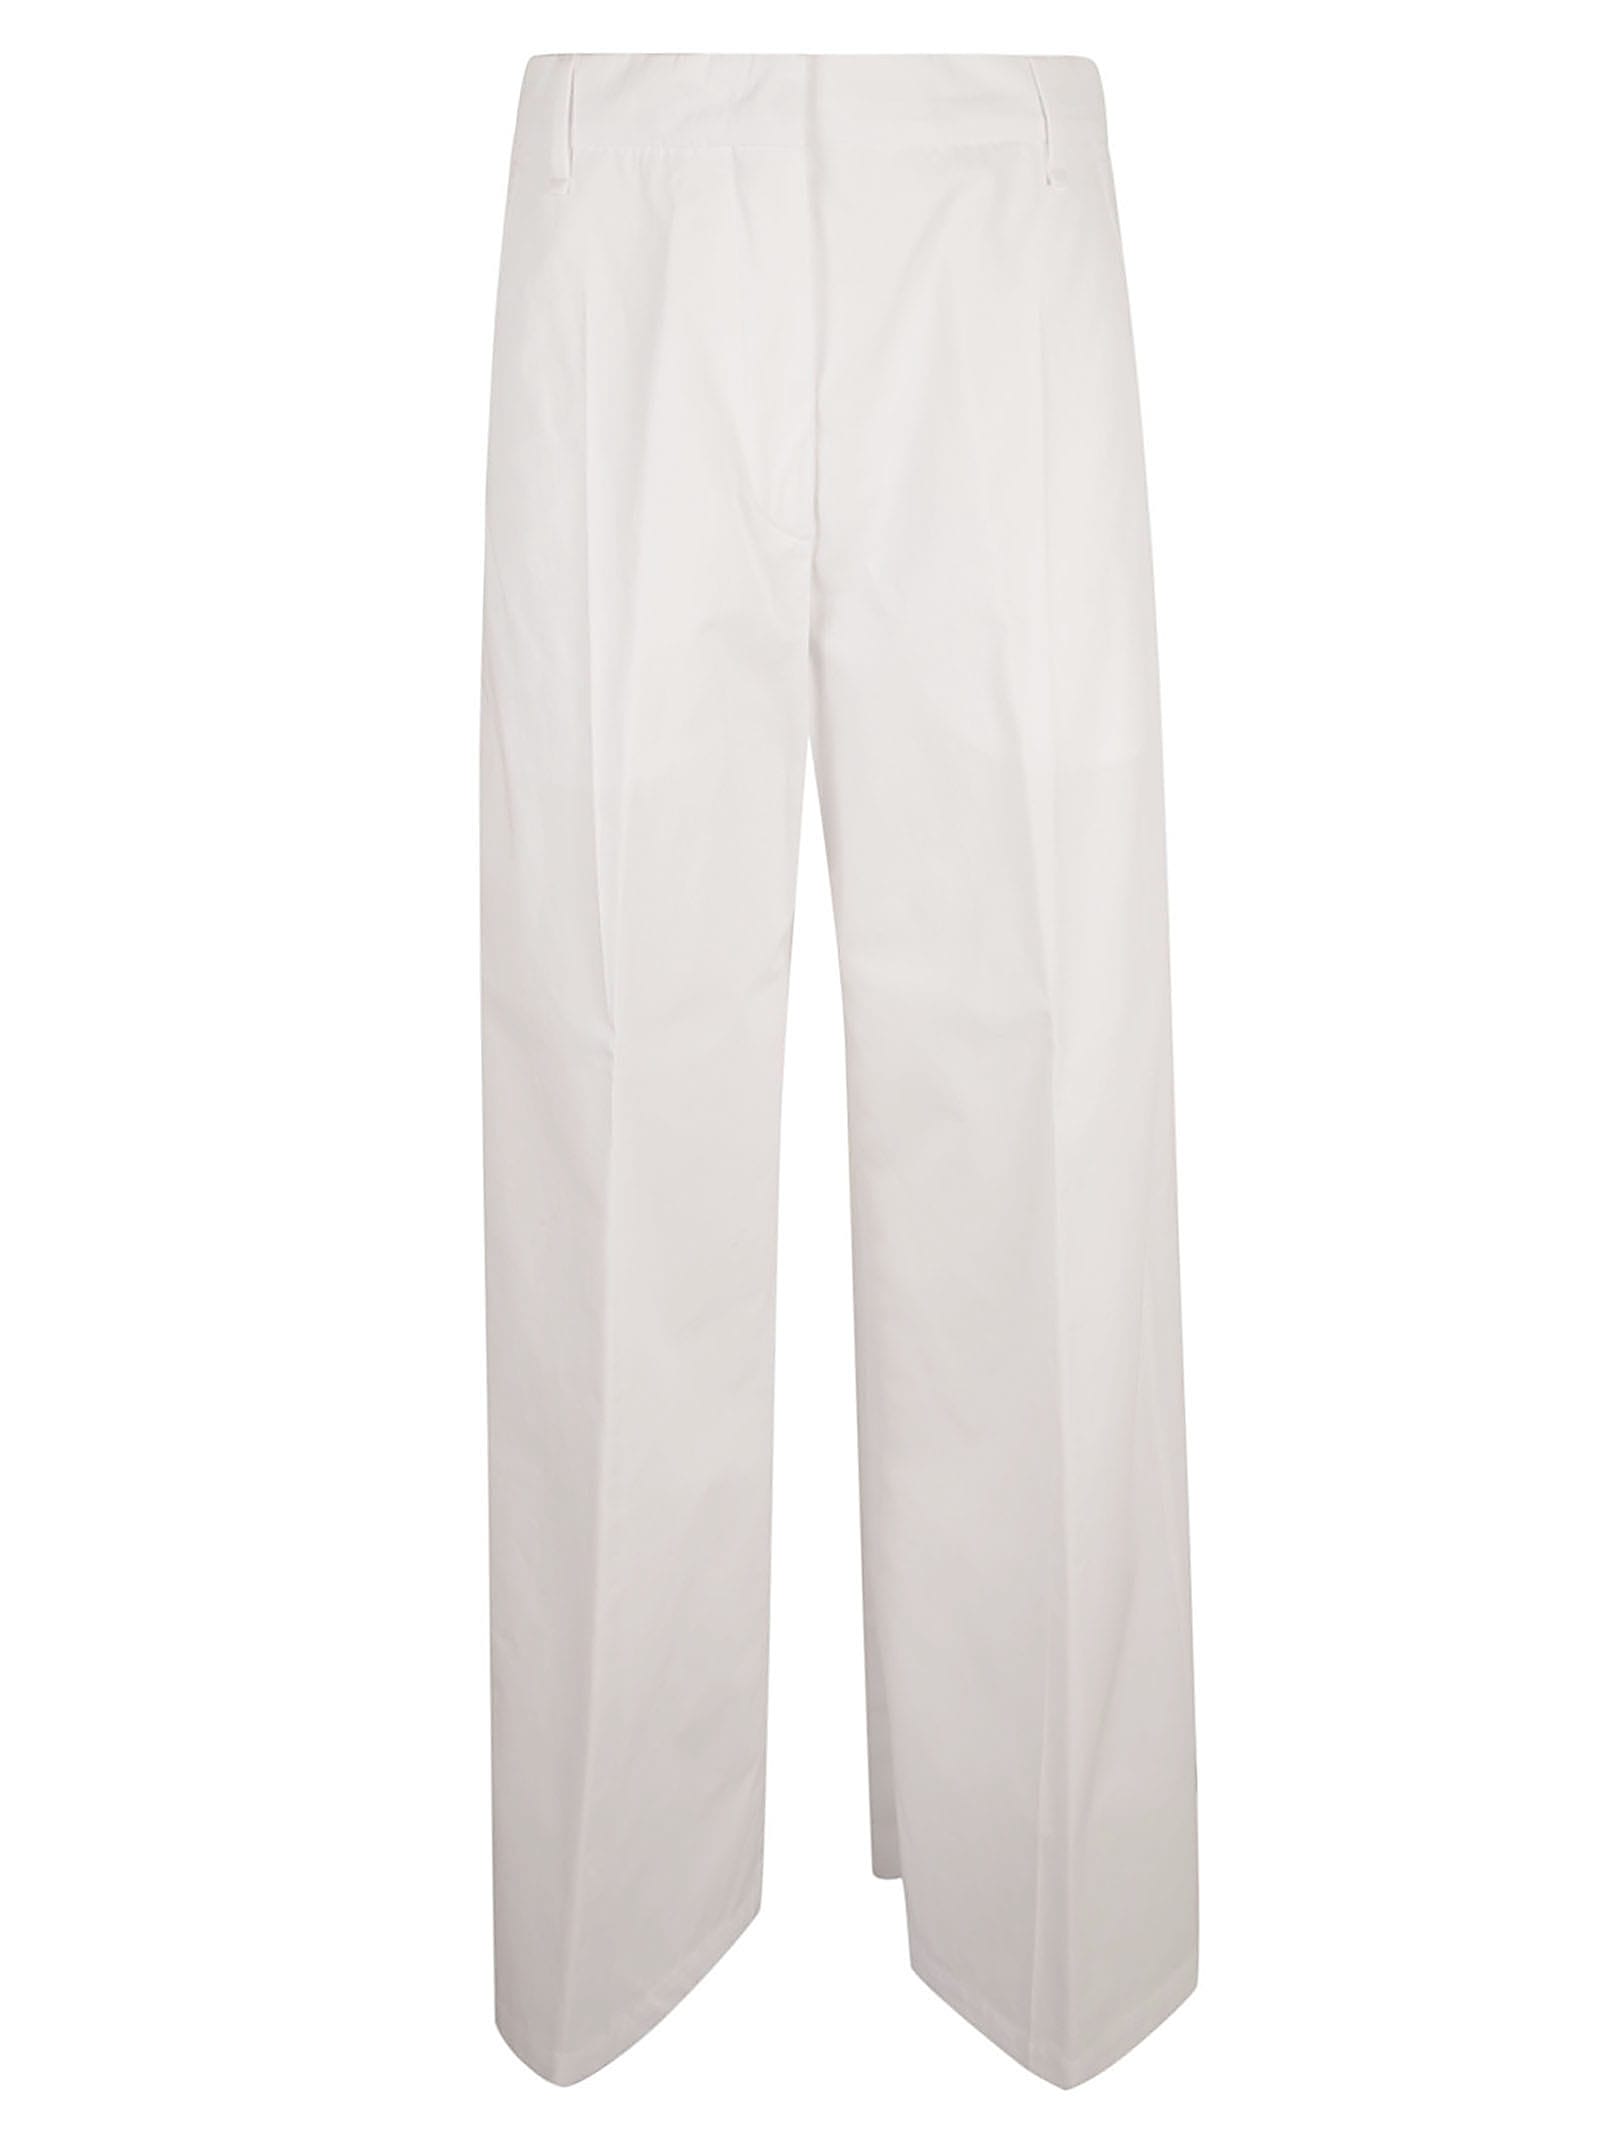 Gebe Trousers